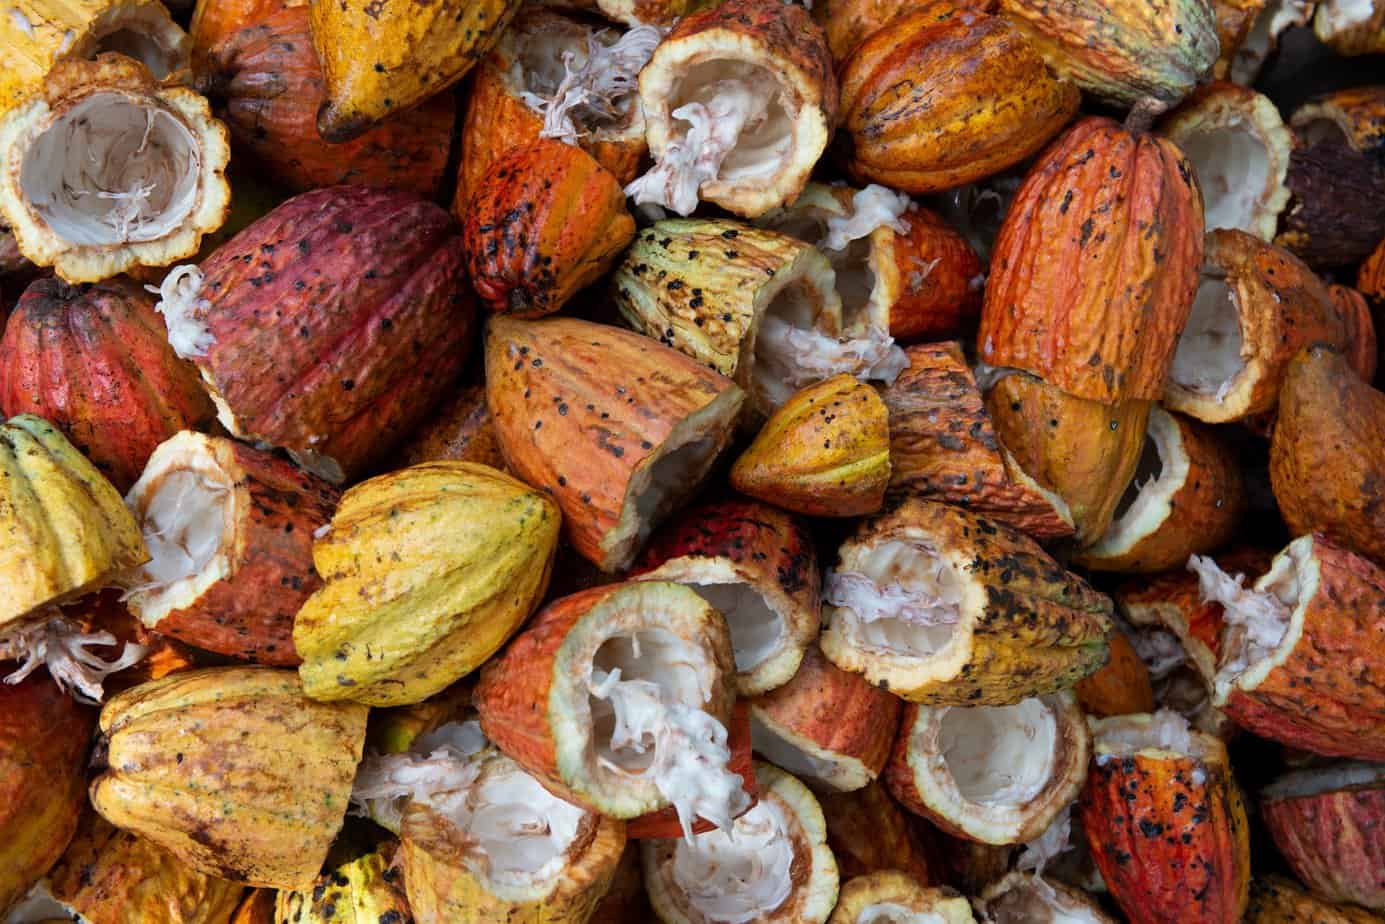 Cacao: The Little Brown Fruit with a Big History